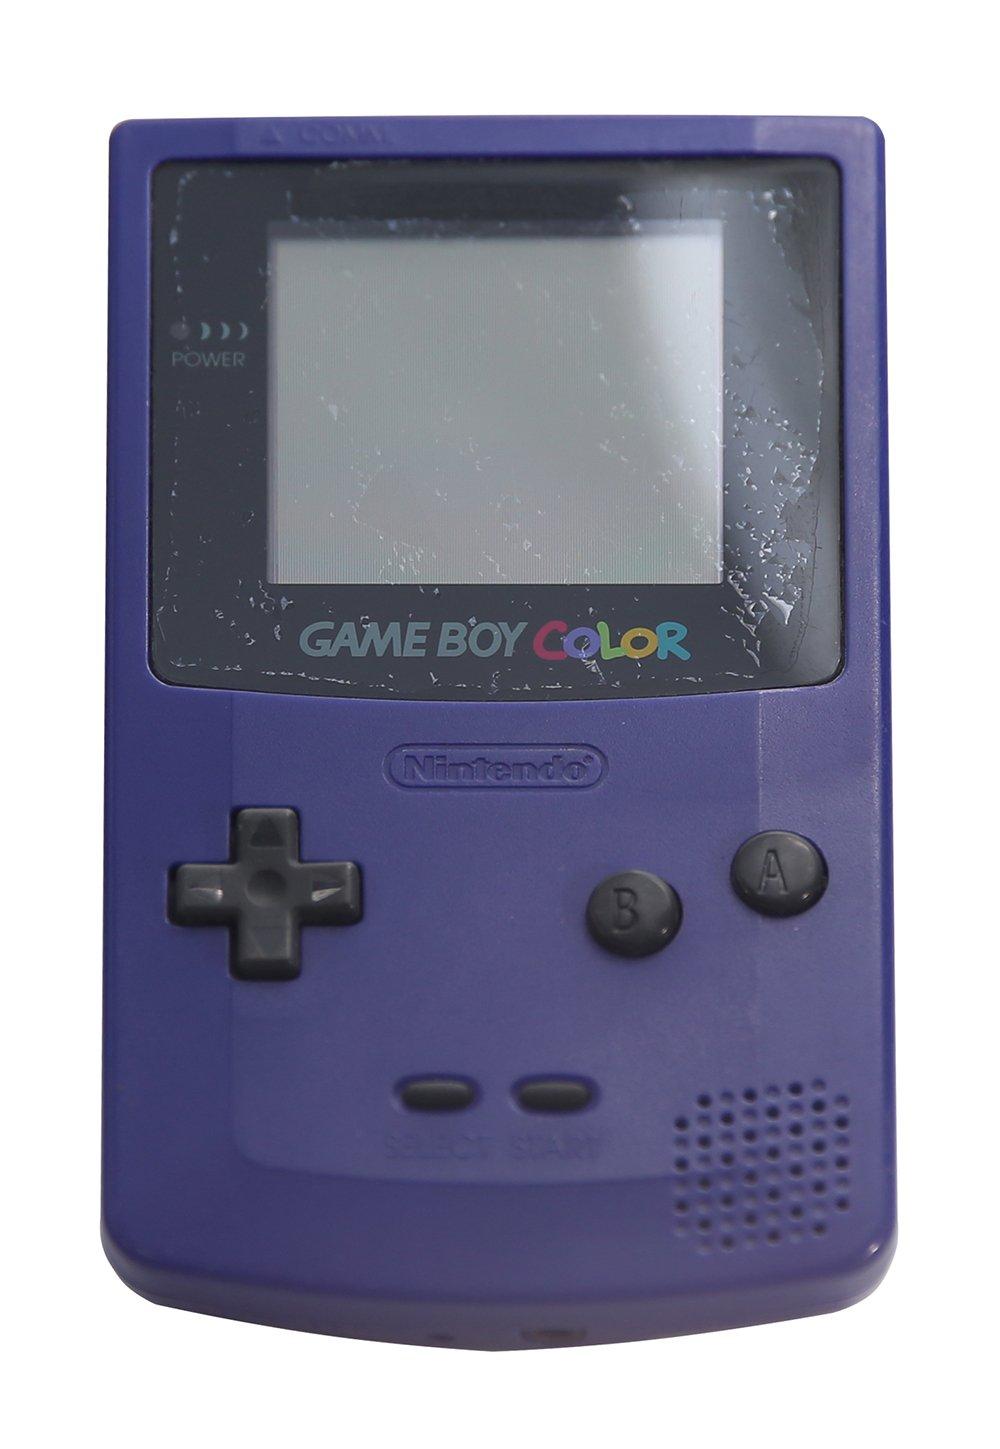 gameboy color selling price